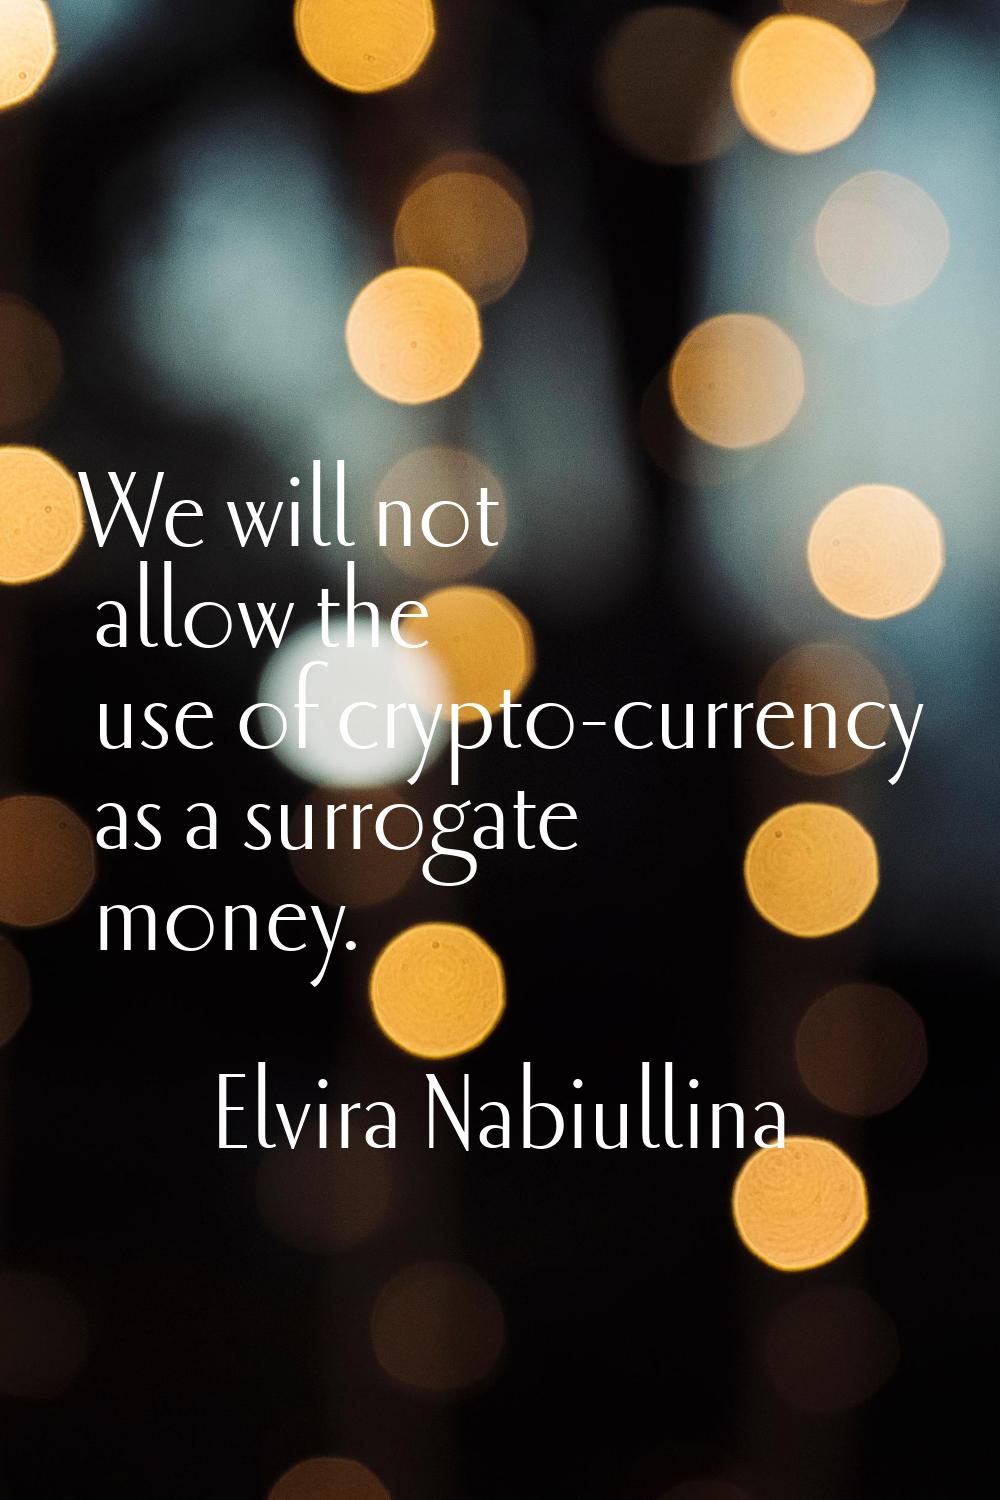 We will not allow the use of crypto-currency as a surrogate money.